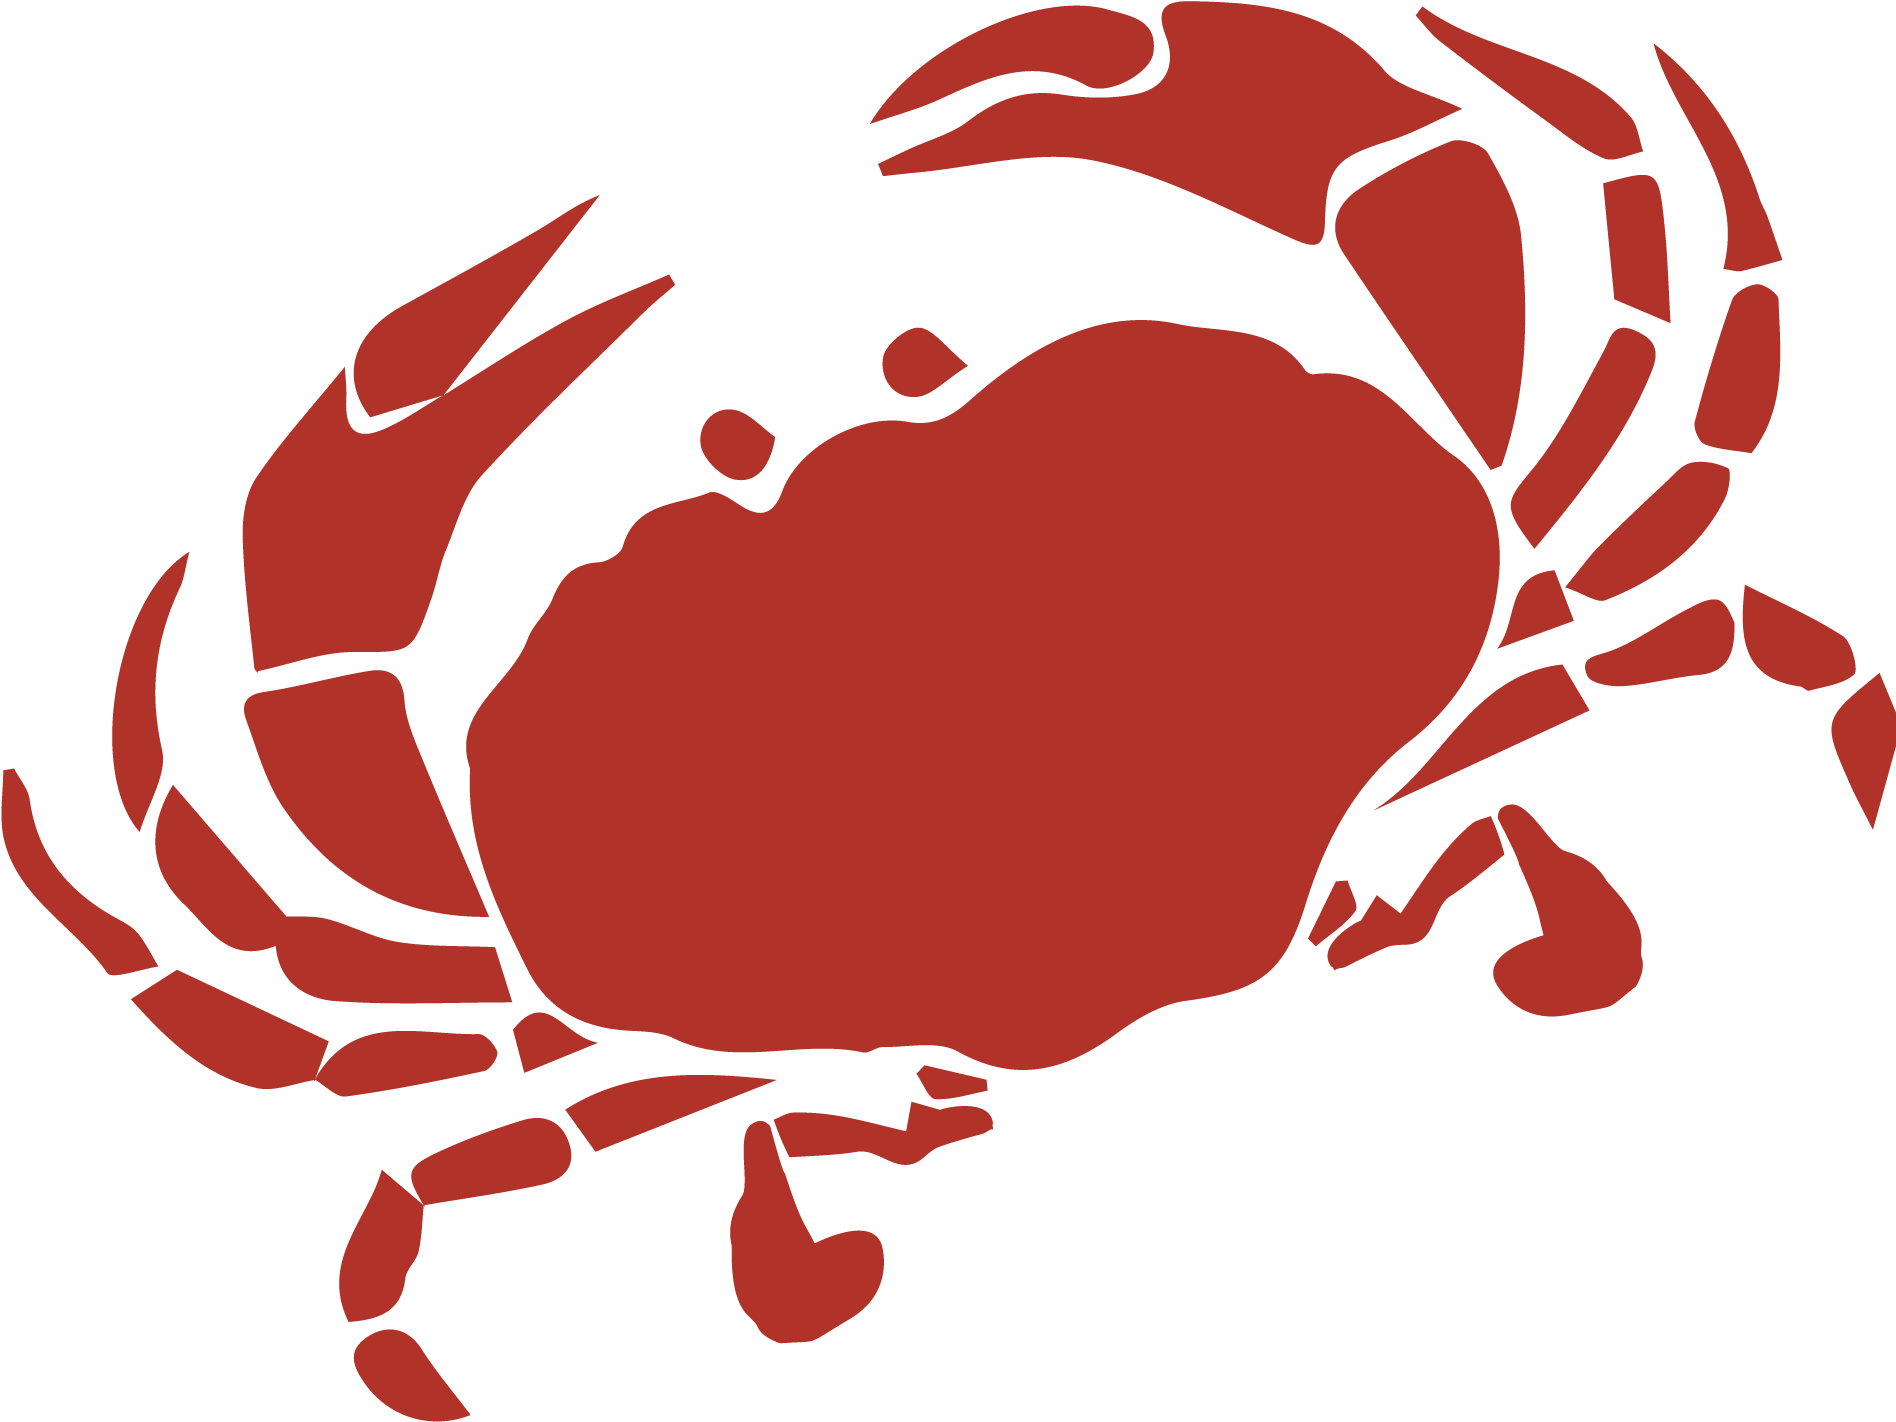 Red Crayfish Silhouette